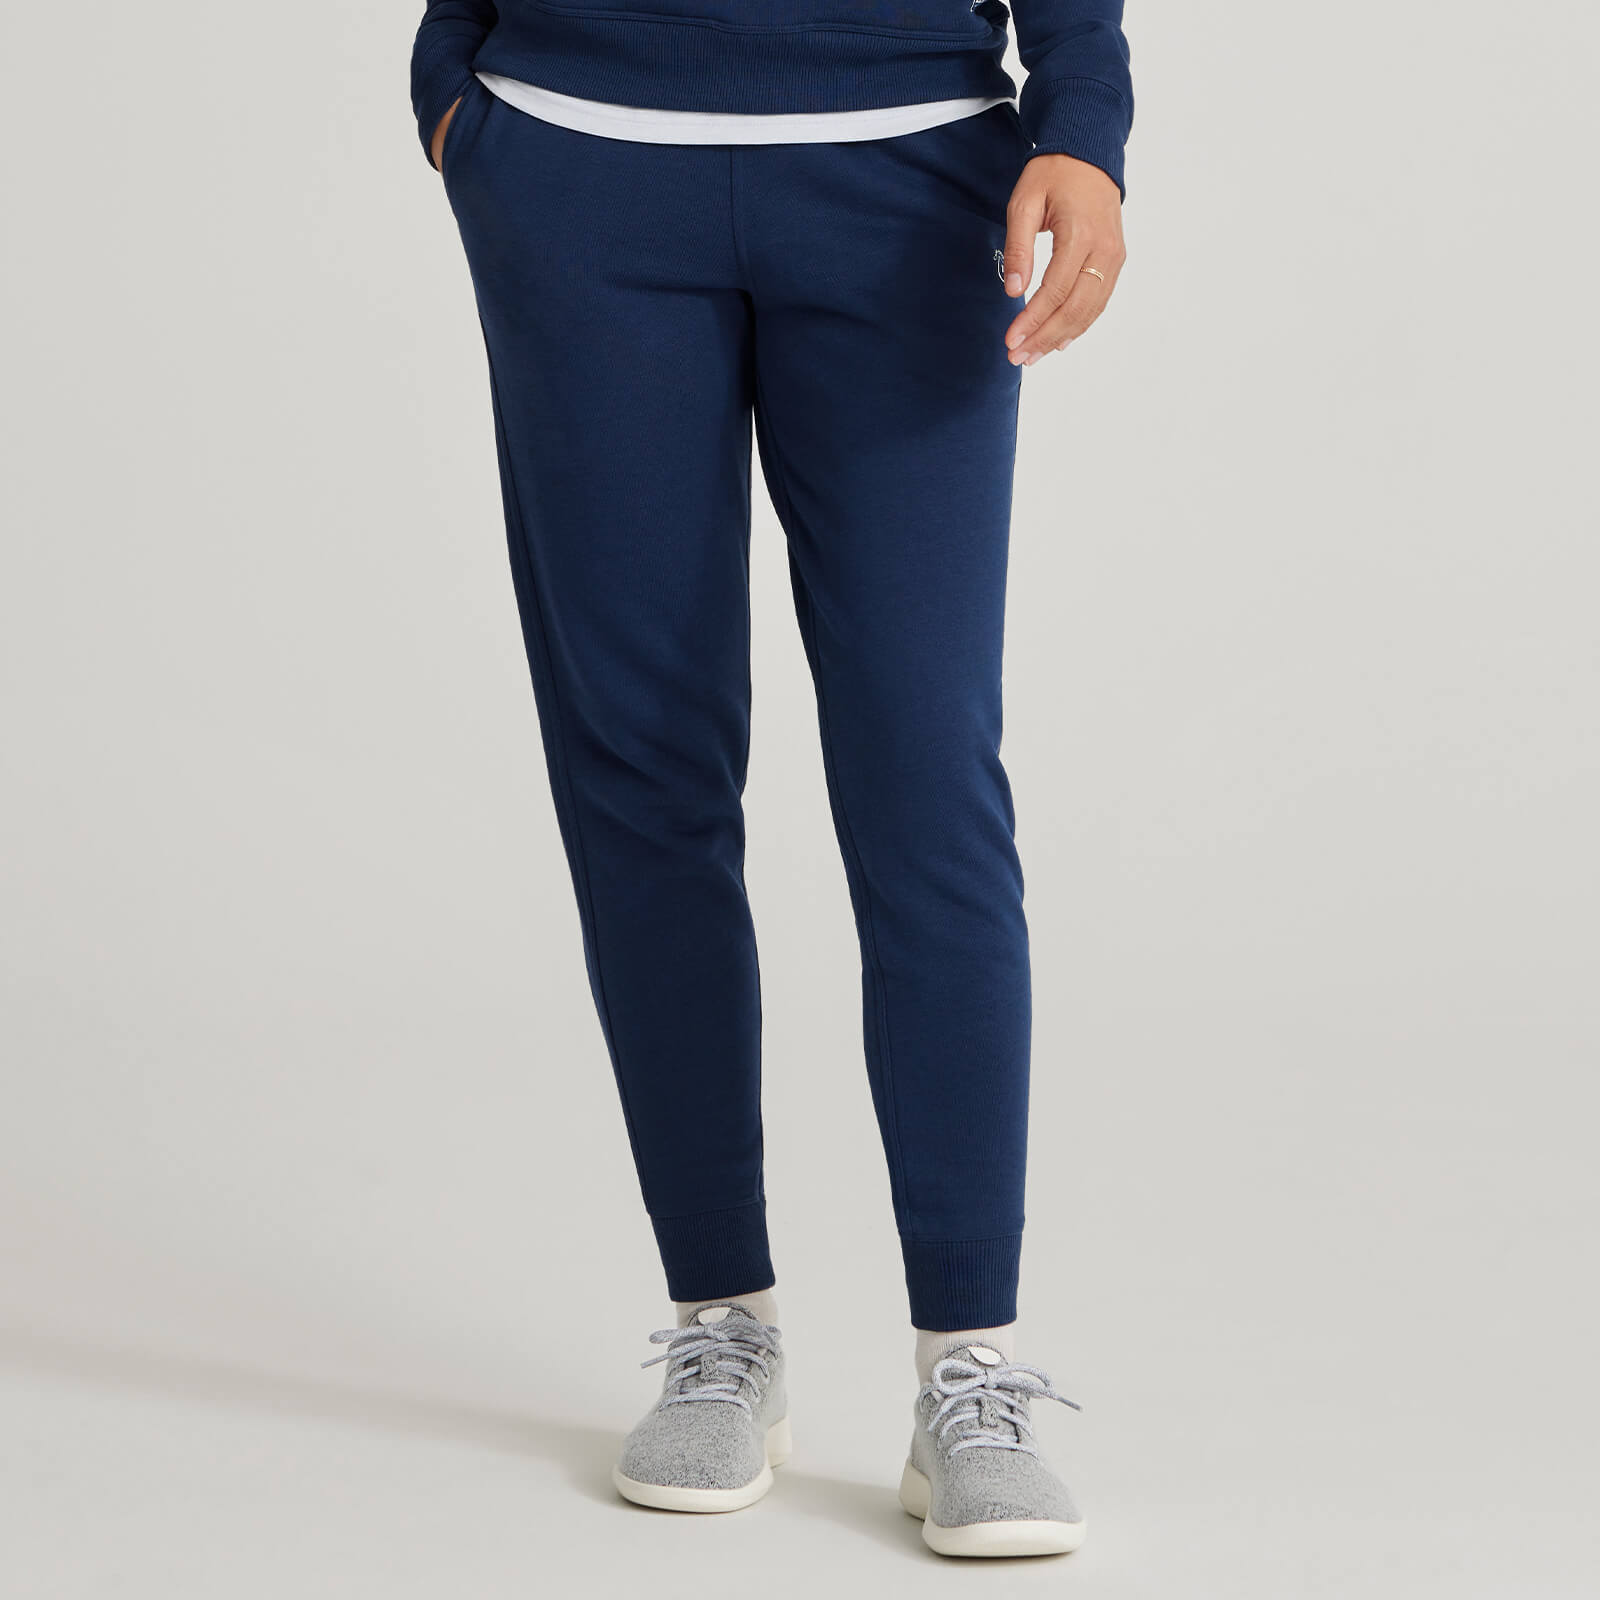 Exclusive Discounts on Allbirds Women's Collection – Limited Time Sale ...